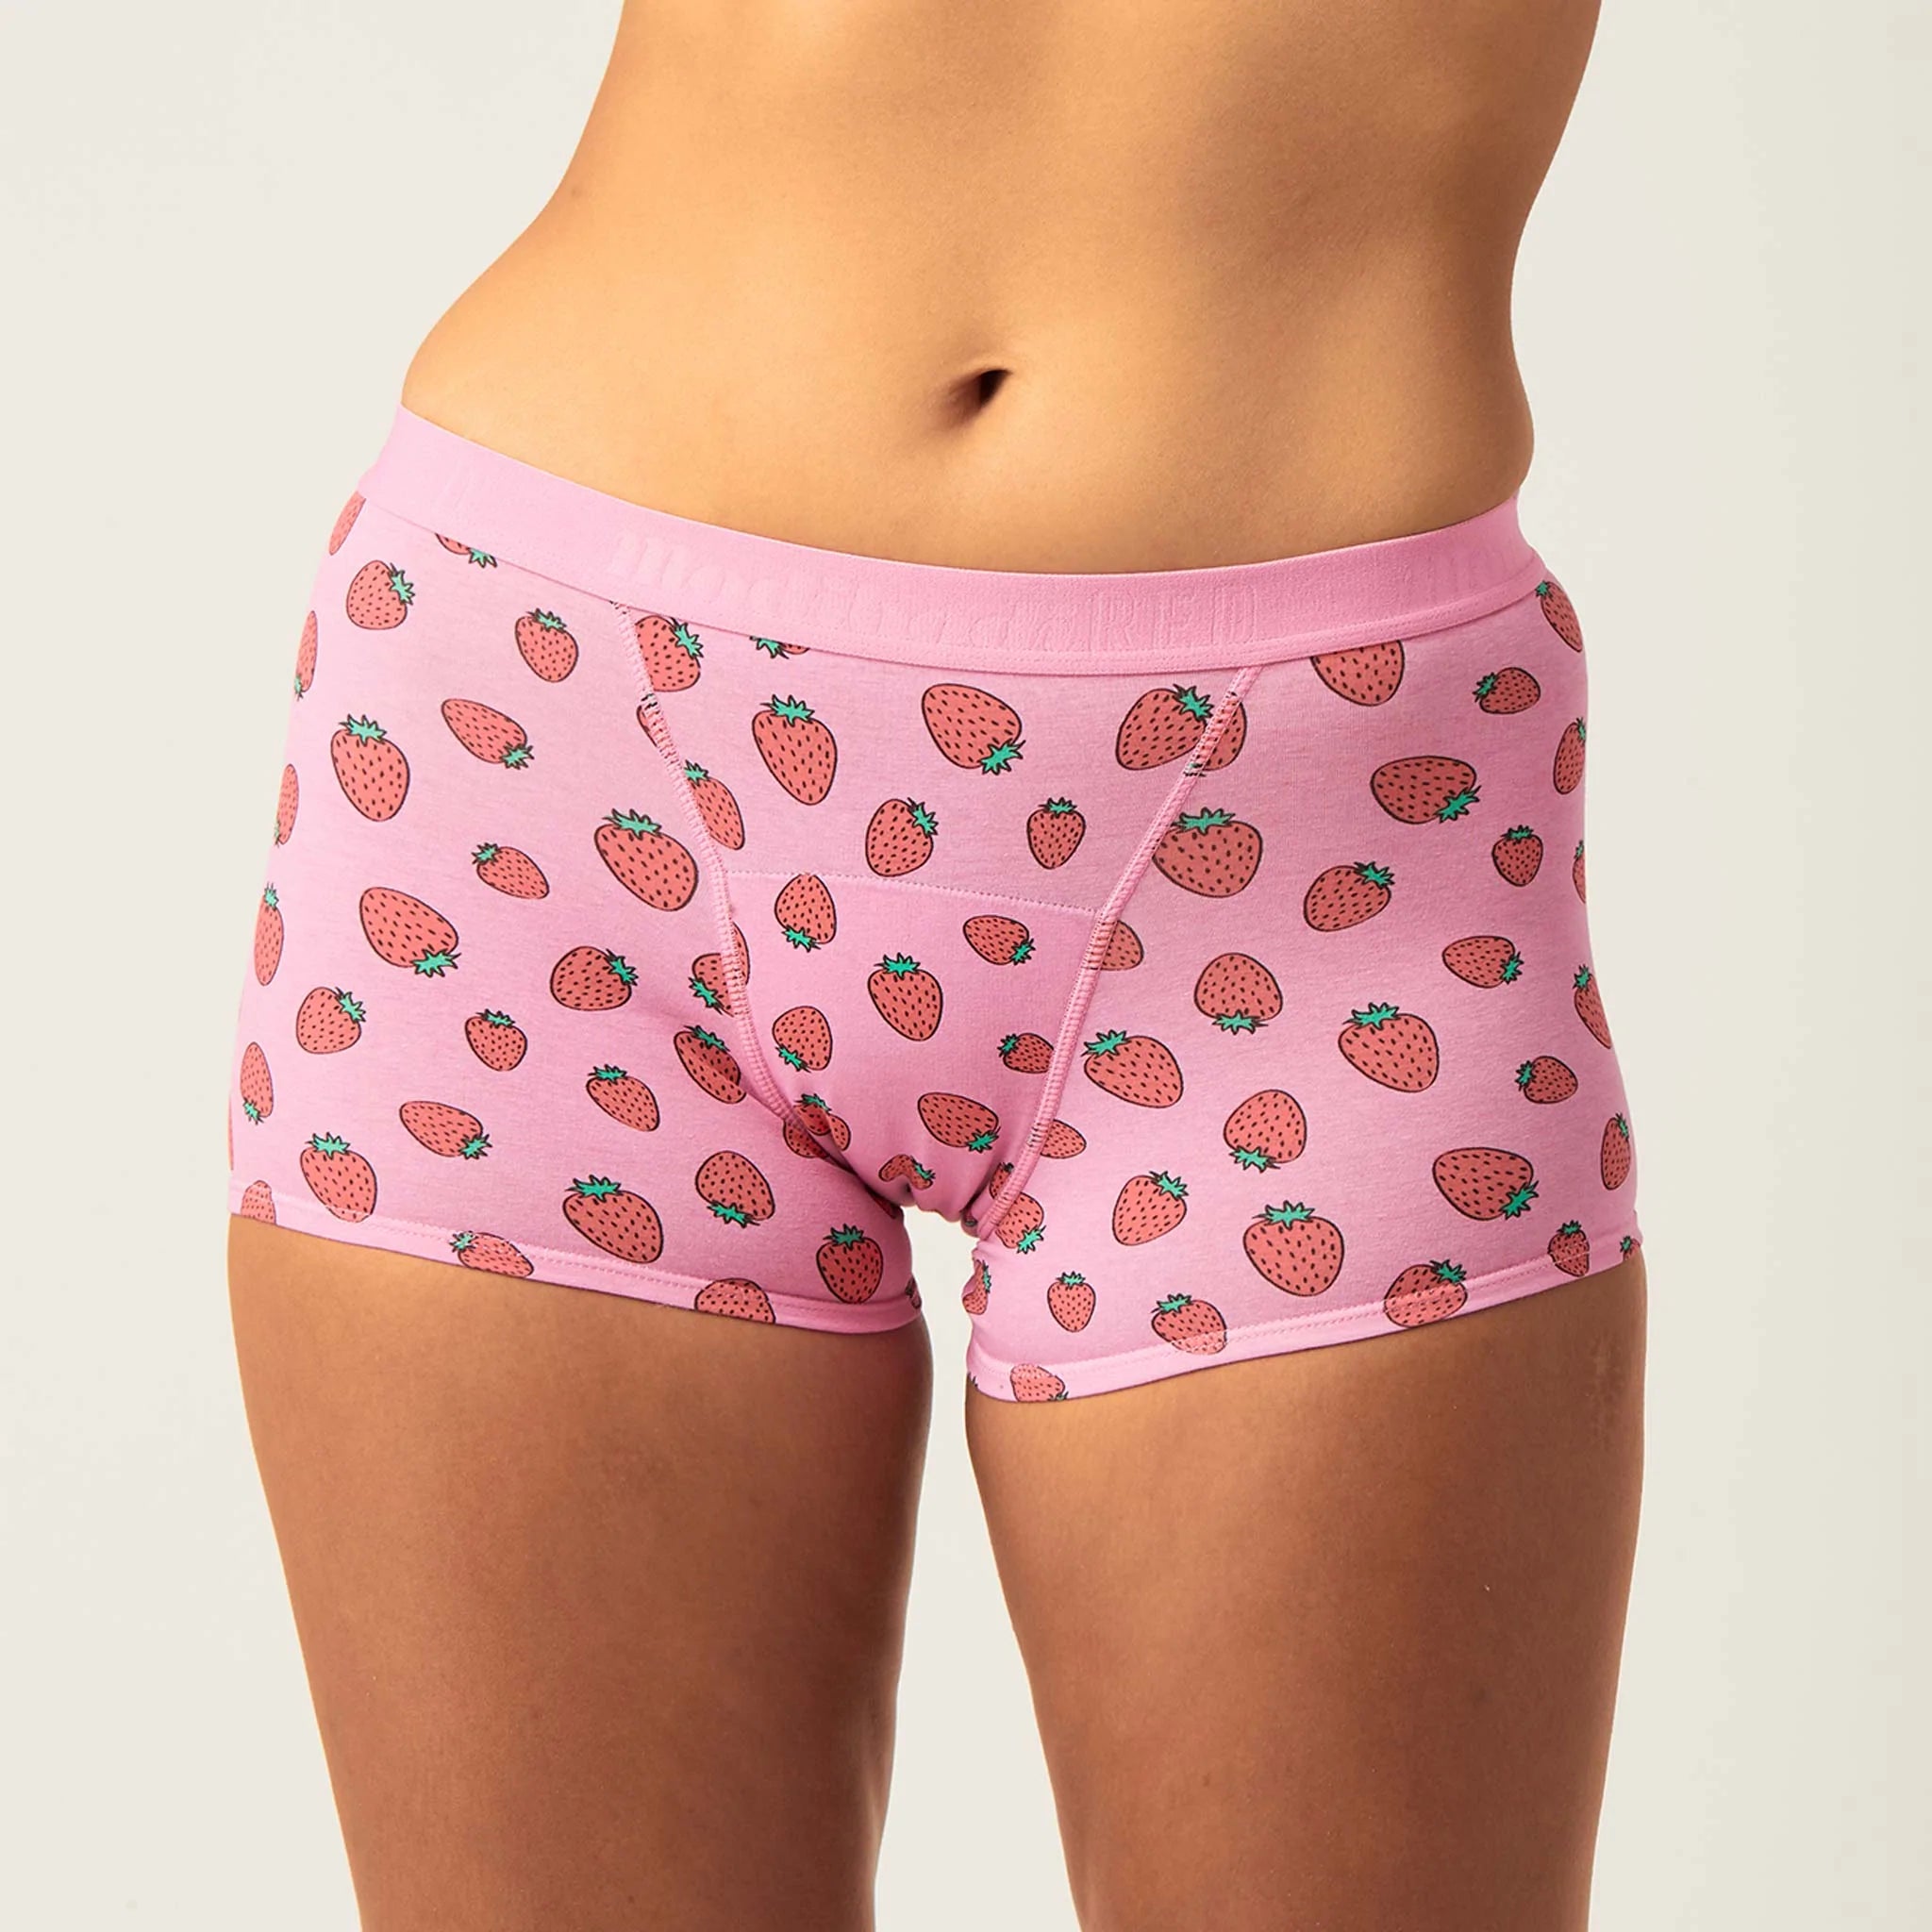 Period pants for tween and teen girls